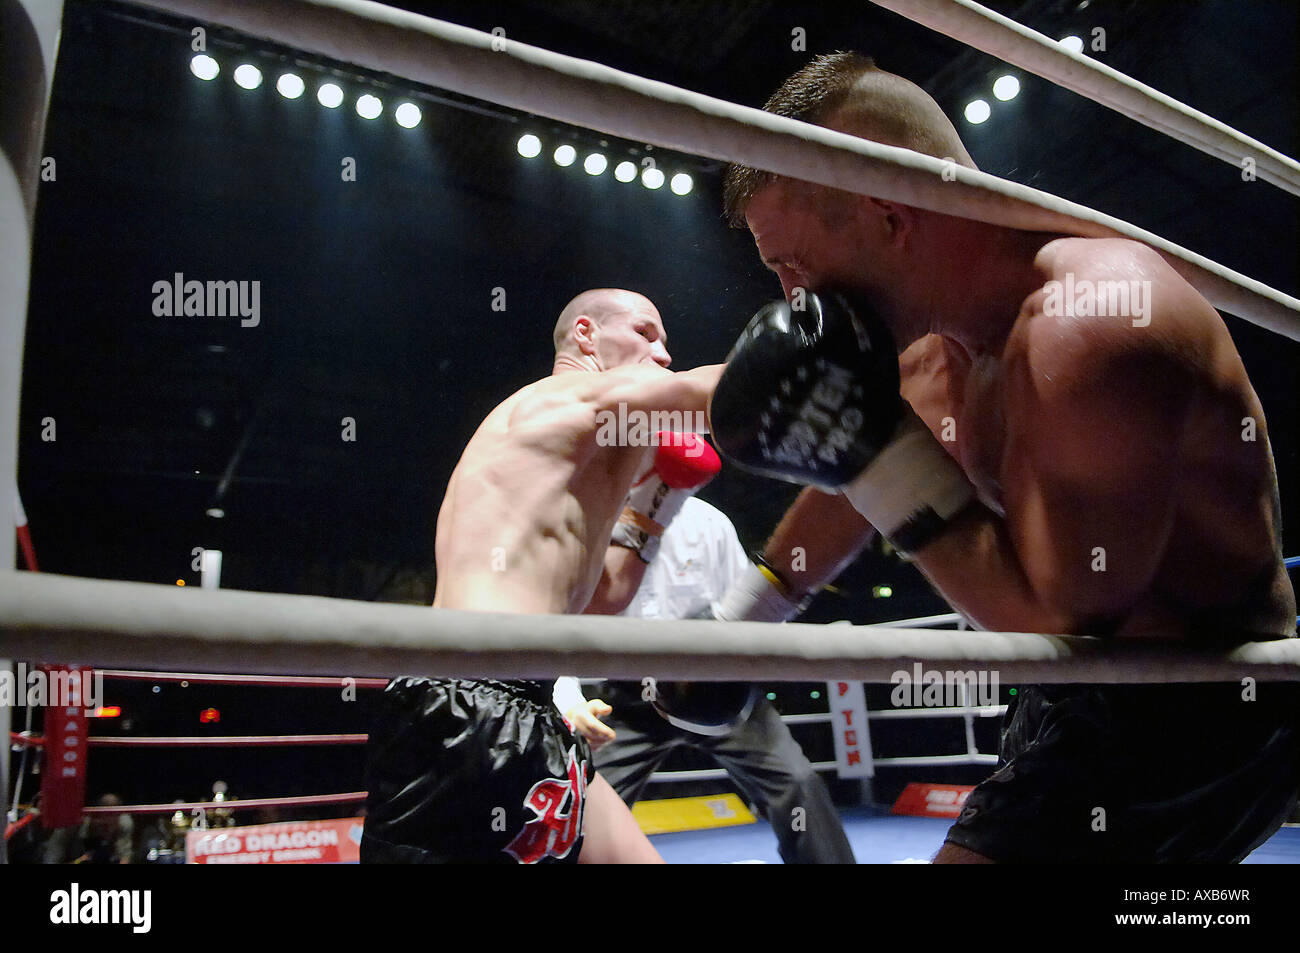 K1 Fighting High Resolution Stock Photography and Images - Alamy